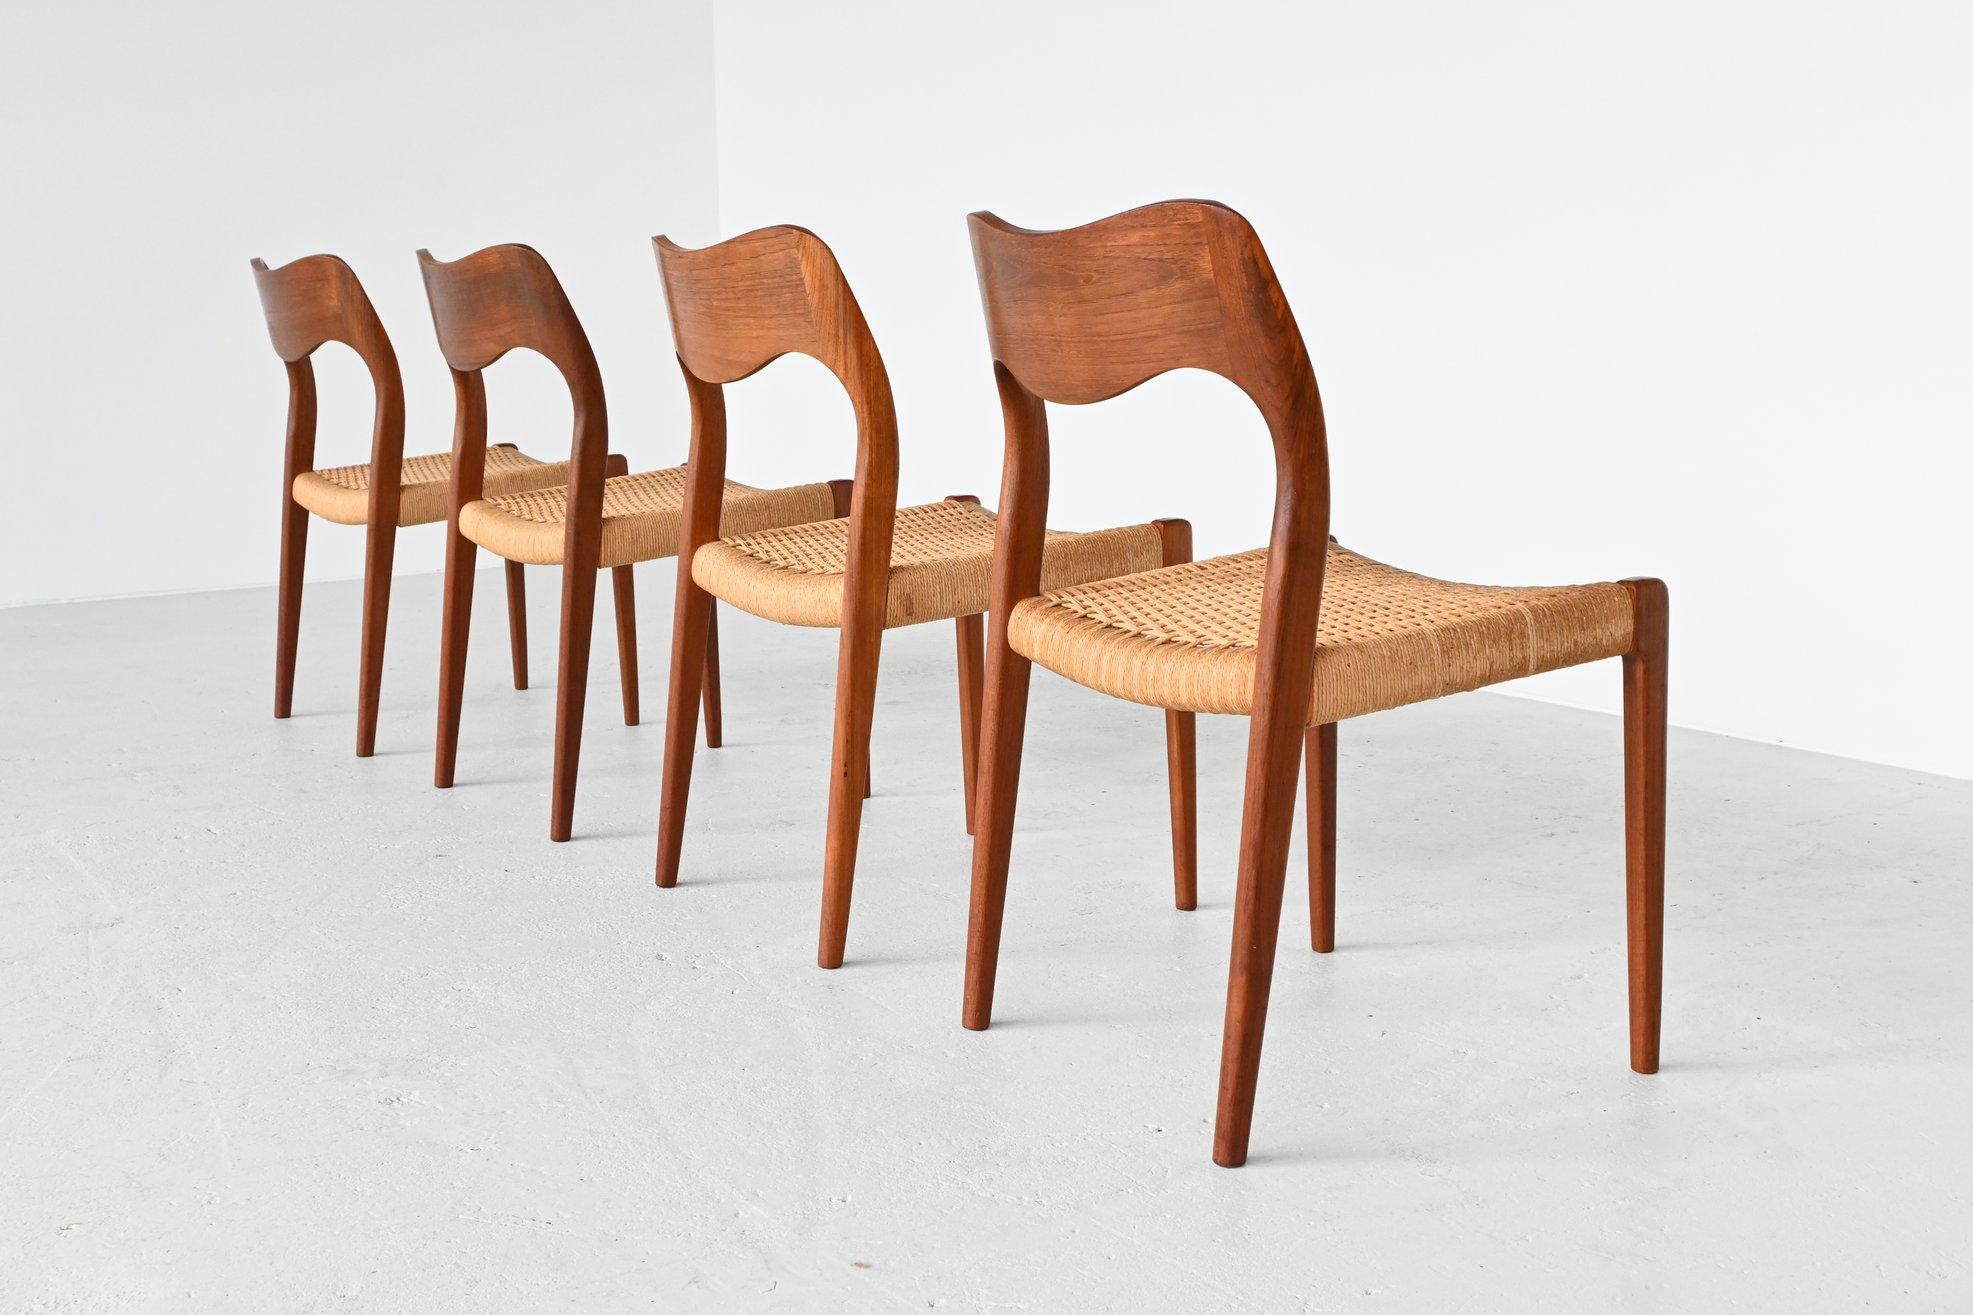 Very nice set of 4 dining chairs model 71 designed by Niels Otto Moller and manufactured by J.L. Møller Mobelfabrik, Denmark 1951. These beautiful shaped Scandinavian chairs are made of solid teak wood and they have original paper cord seats. They